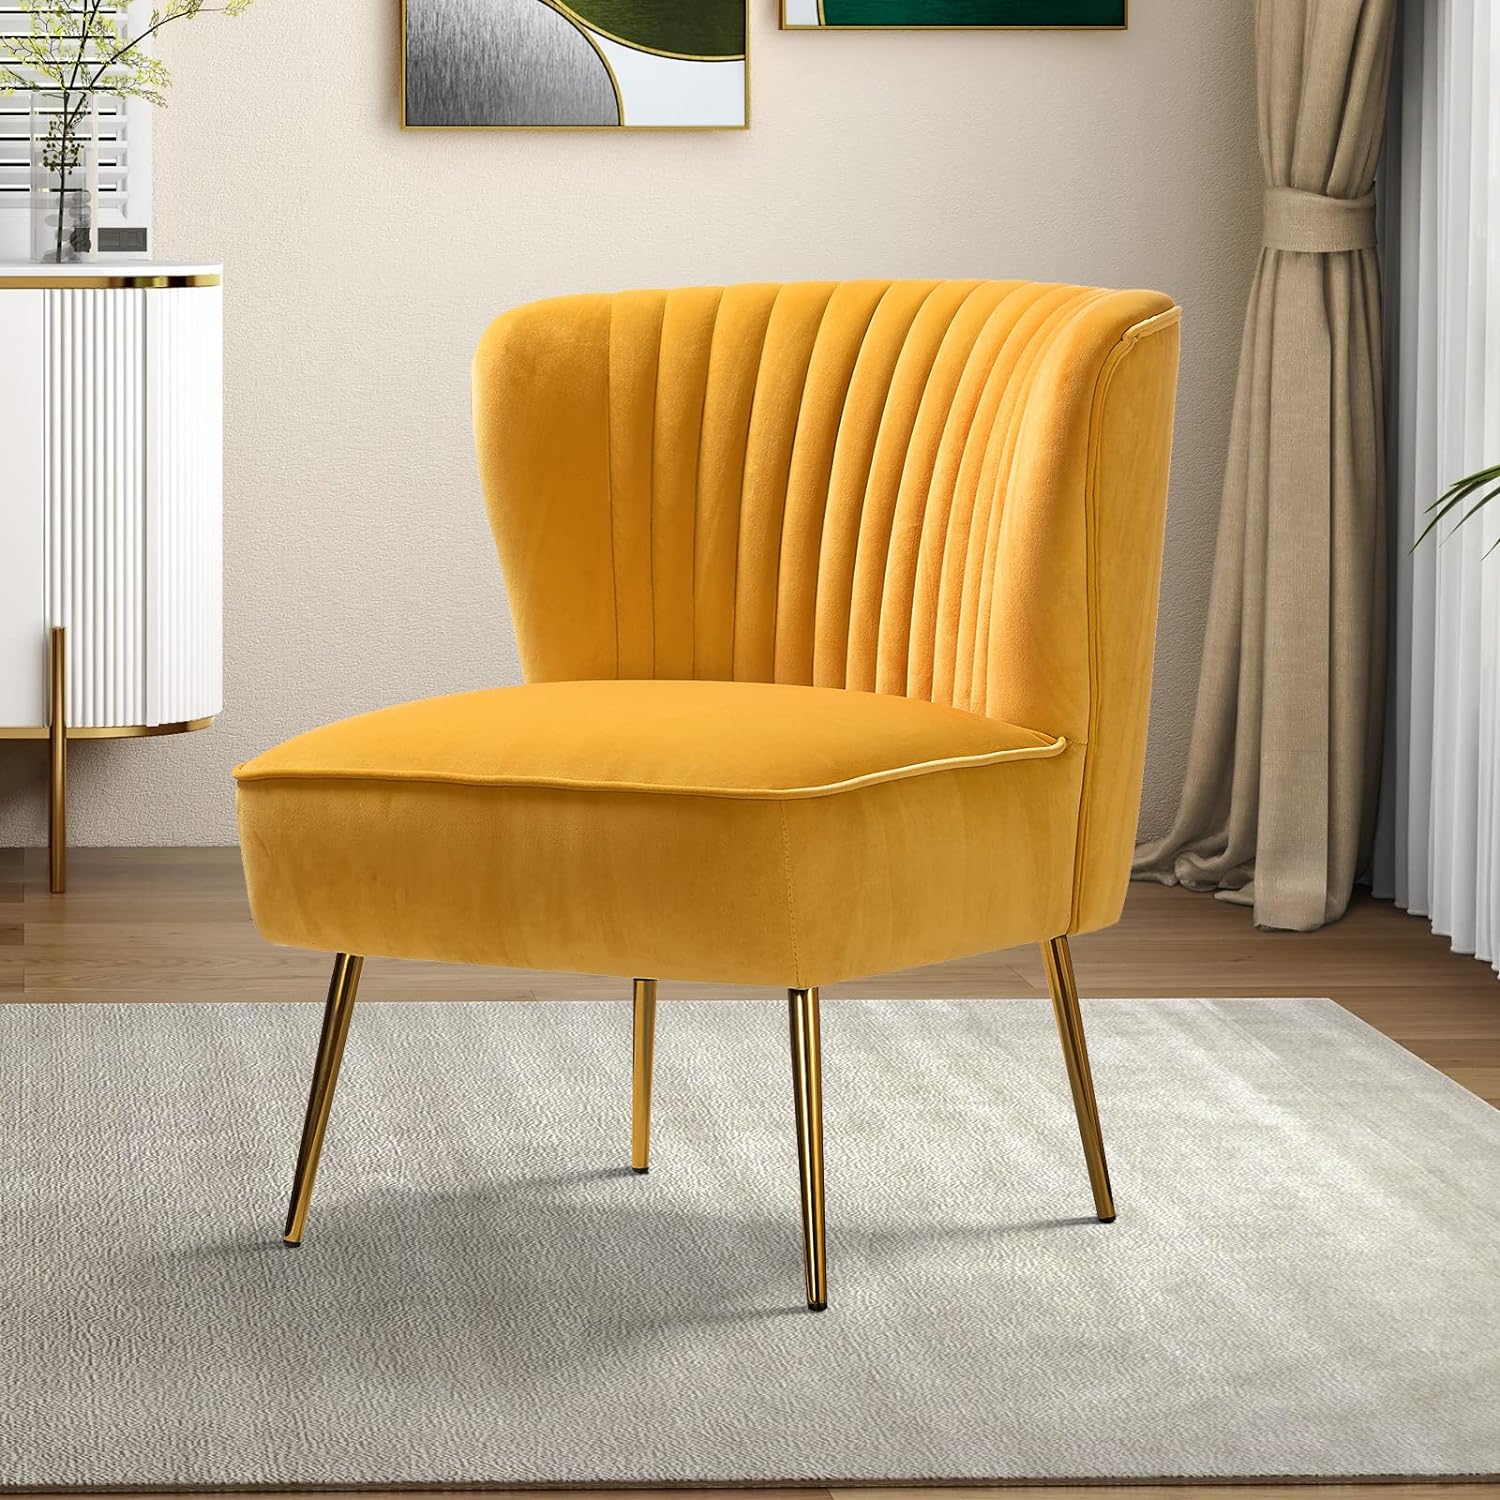 HULALA HOME Velvet Accent Chair, Modern Upholstered Cute Side Chair with Gold Metal Legs, Armless Wingback Slipper Chair Comfy Living Room Chair for Bedroom Guest Room Vanity, Mustard